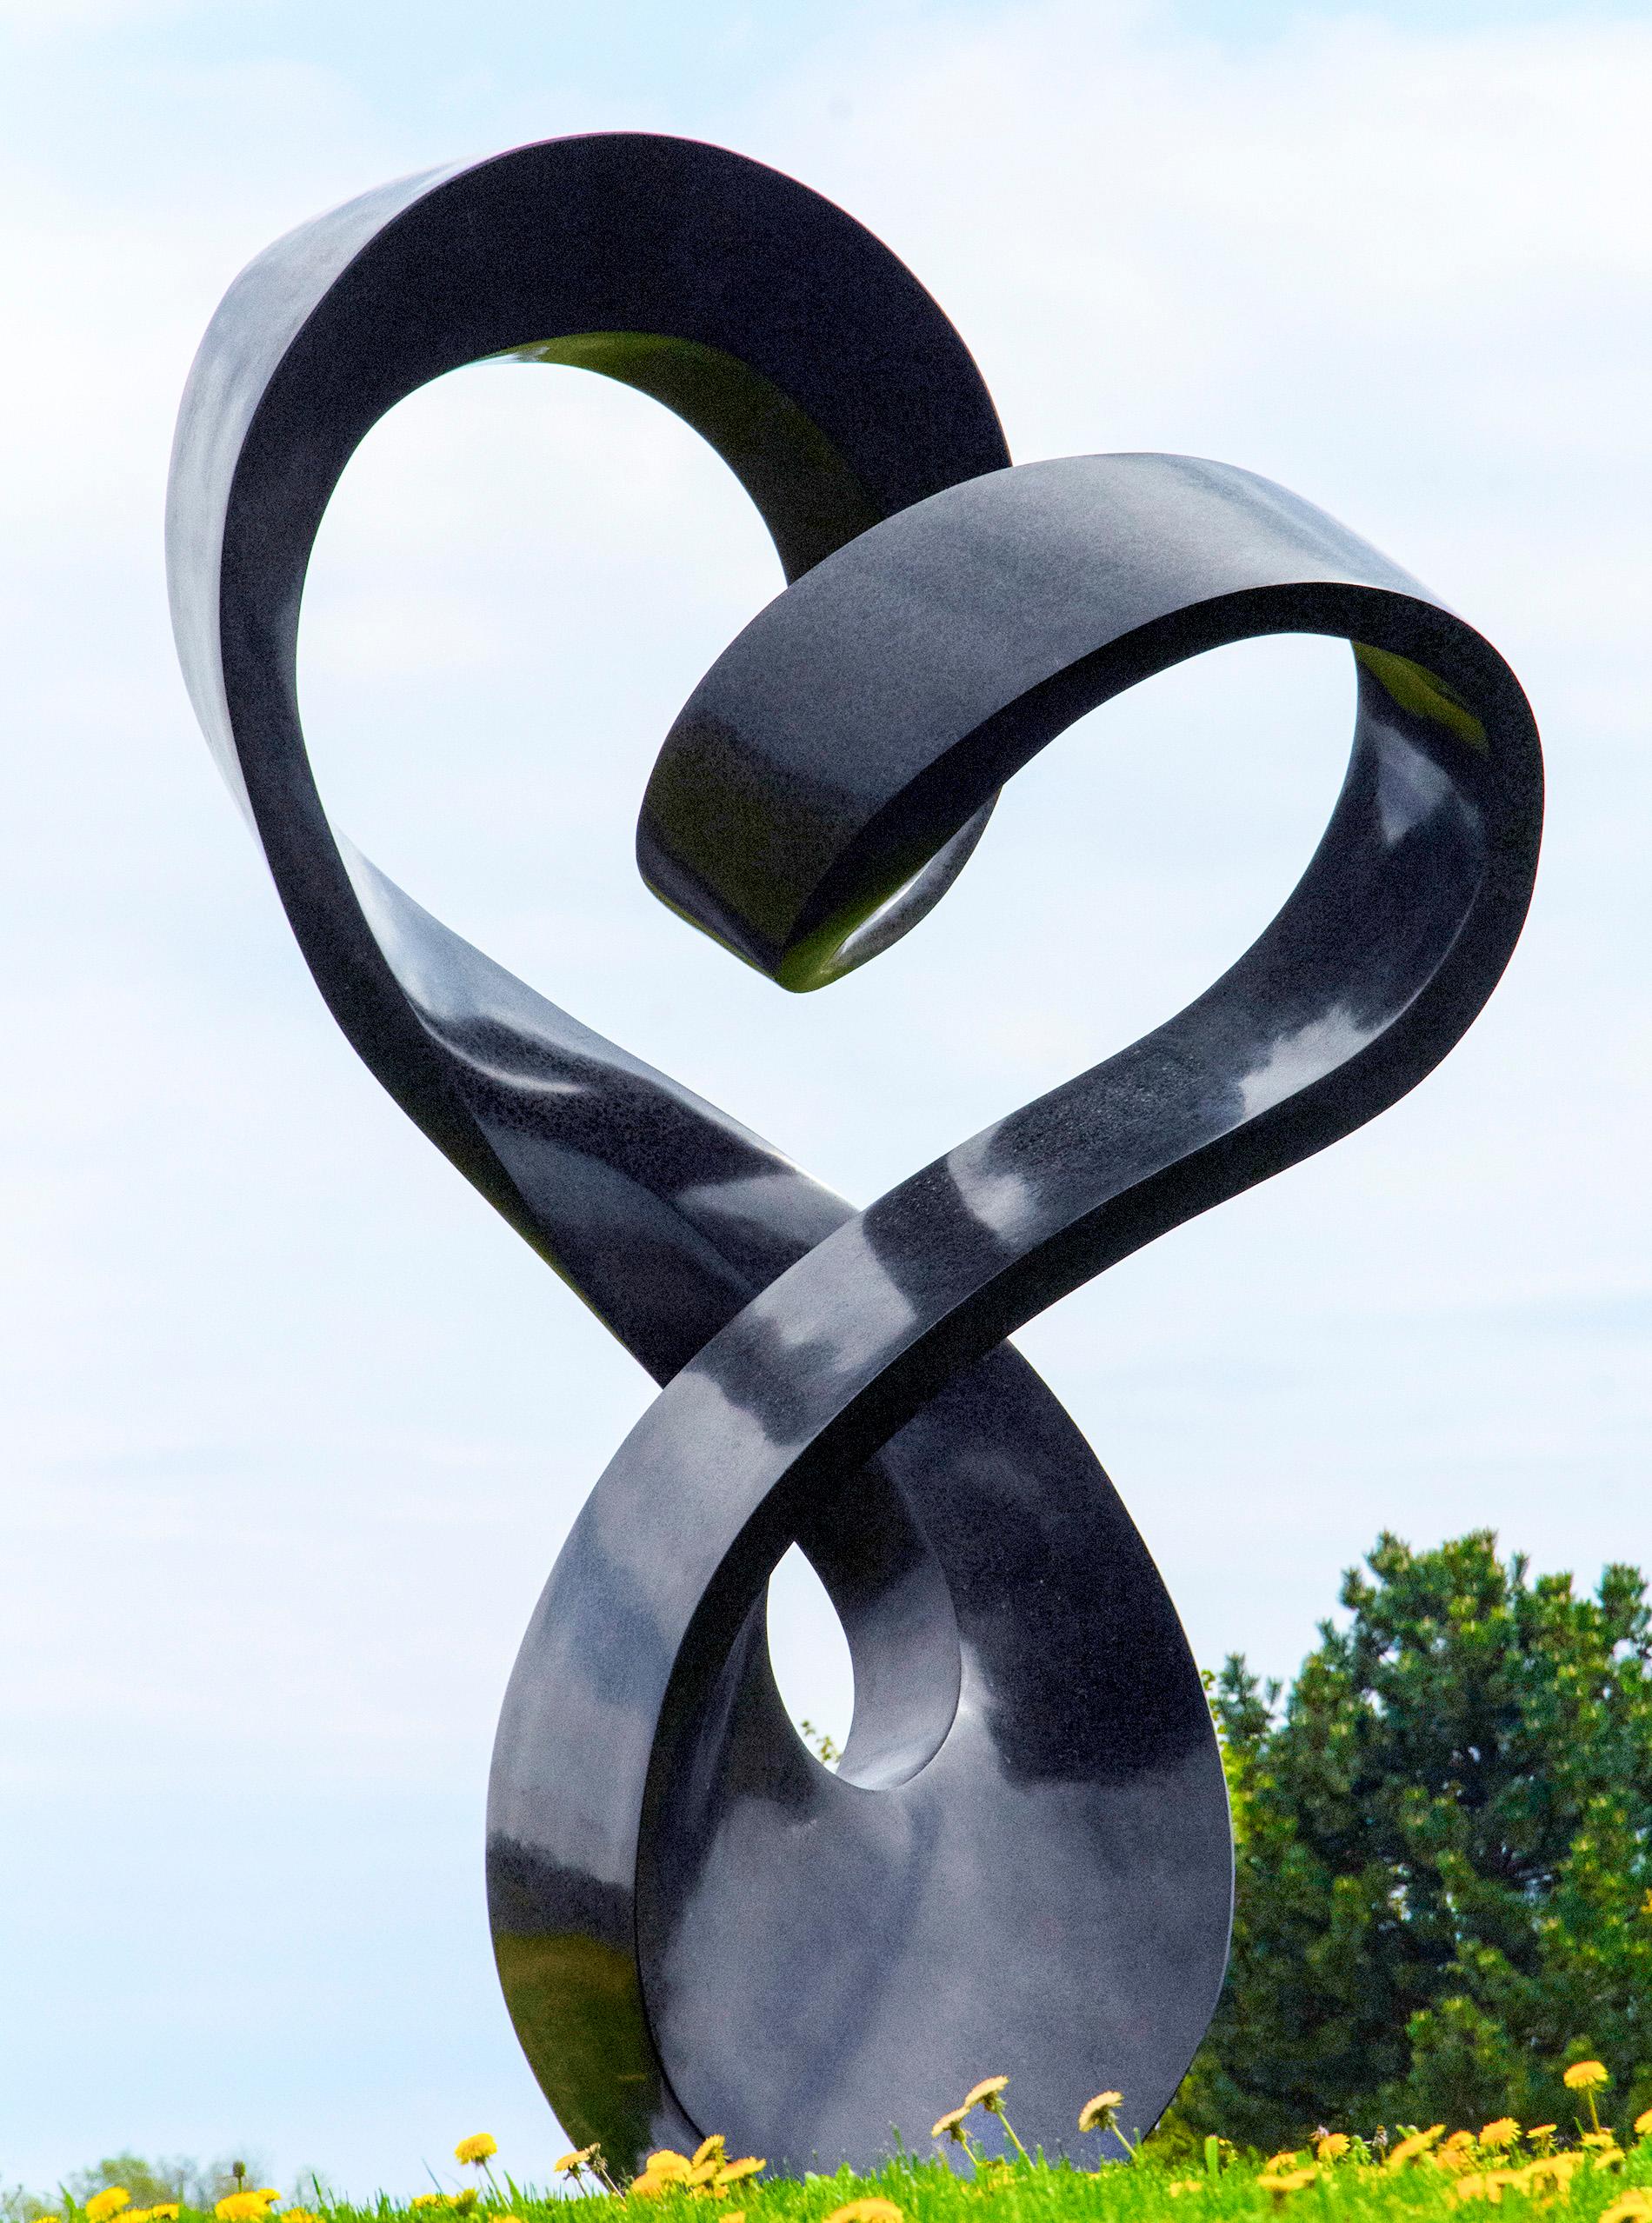 Overture 3/5 - large scale, smooth, black granite, outdoor, abstract sculpture - Sculpture by Jeremy Guy